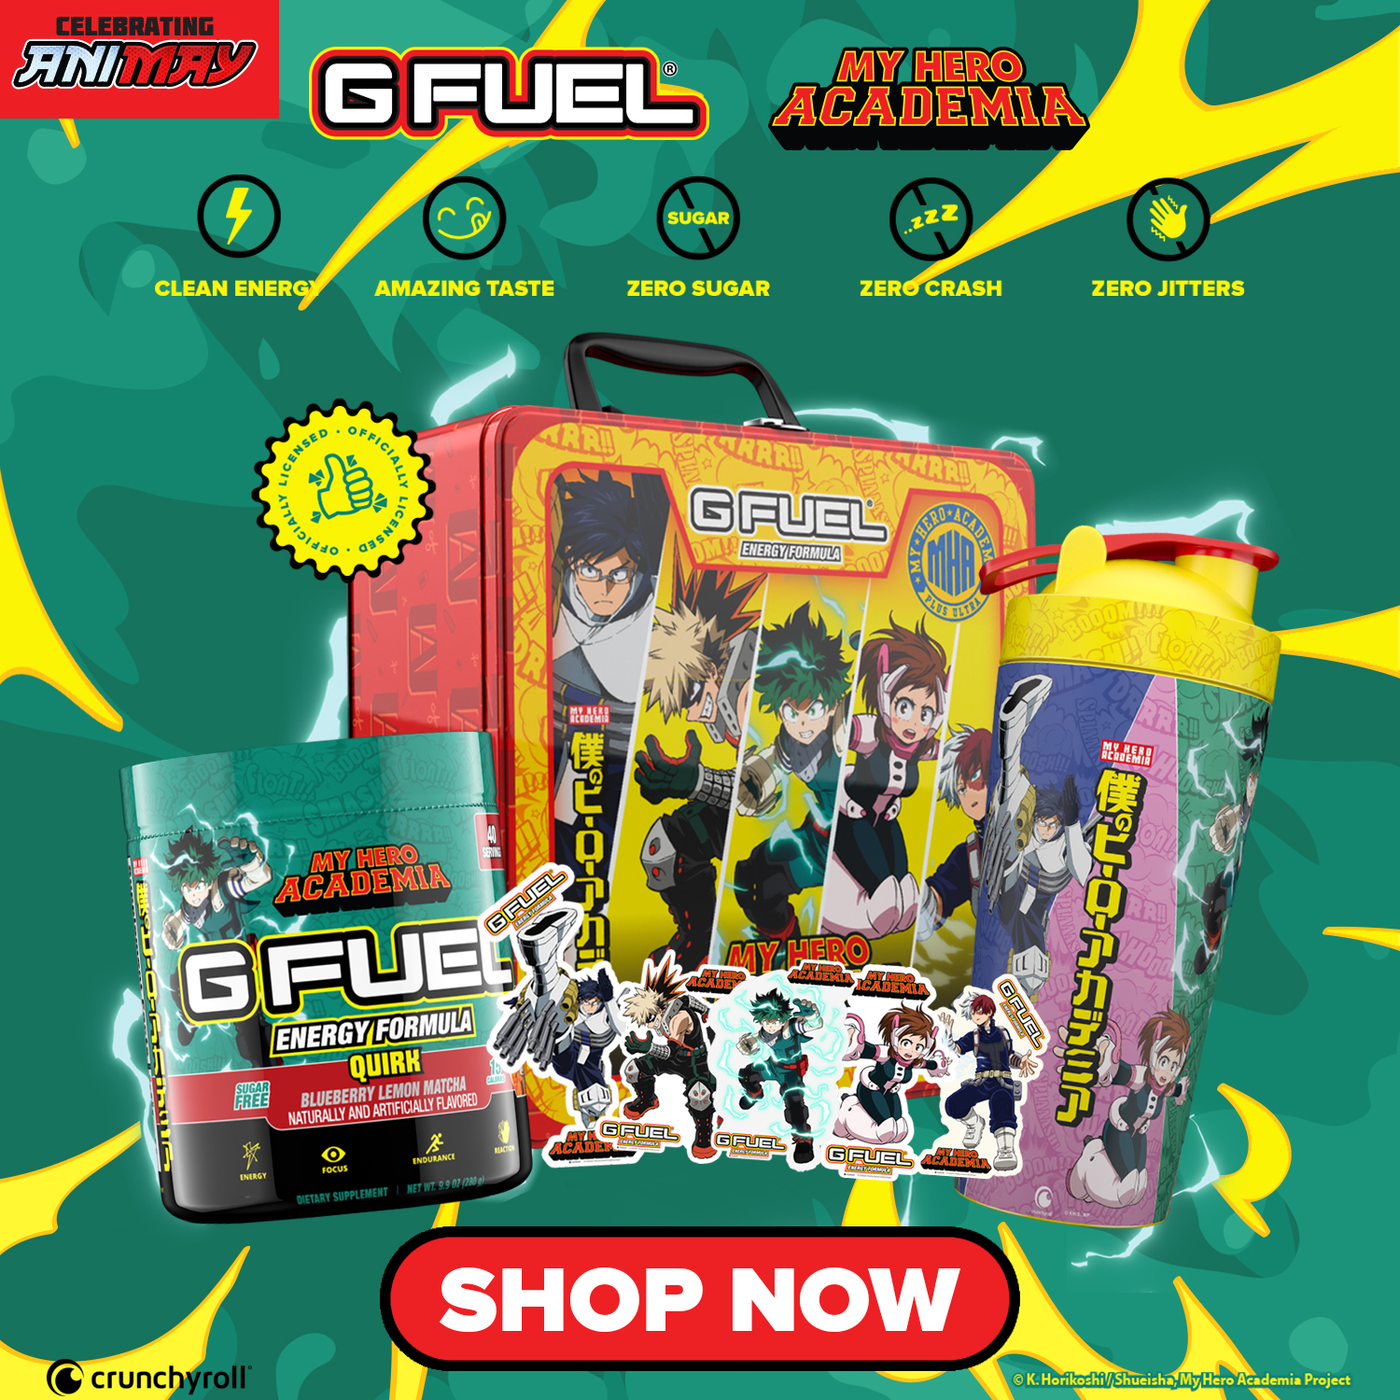  G FUEL x My Hero Academia | Quirk Collector's Box | Celebrating Animay | Click To Shop Now!